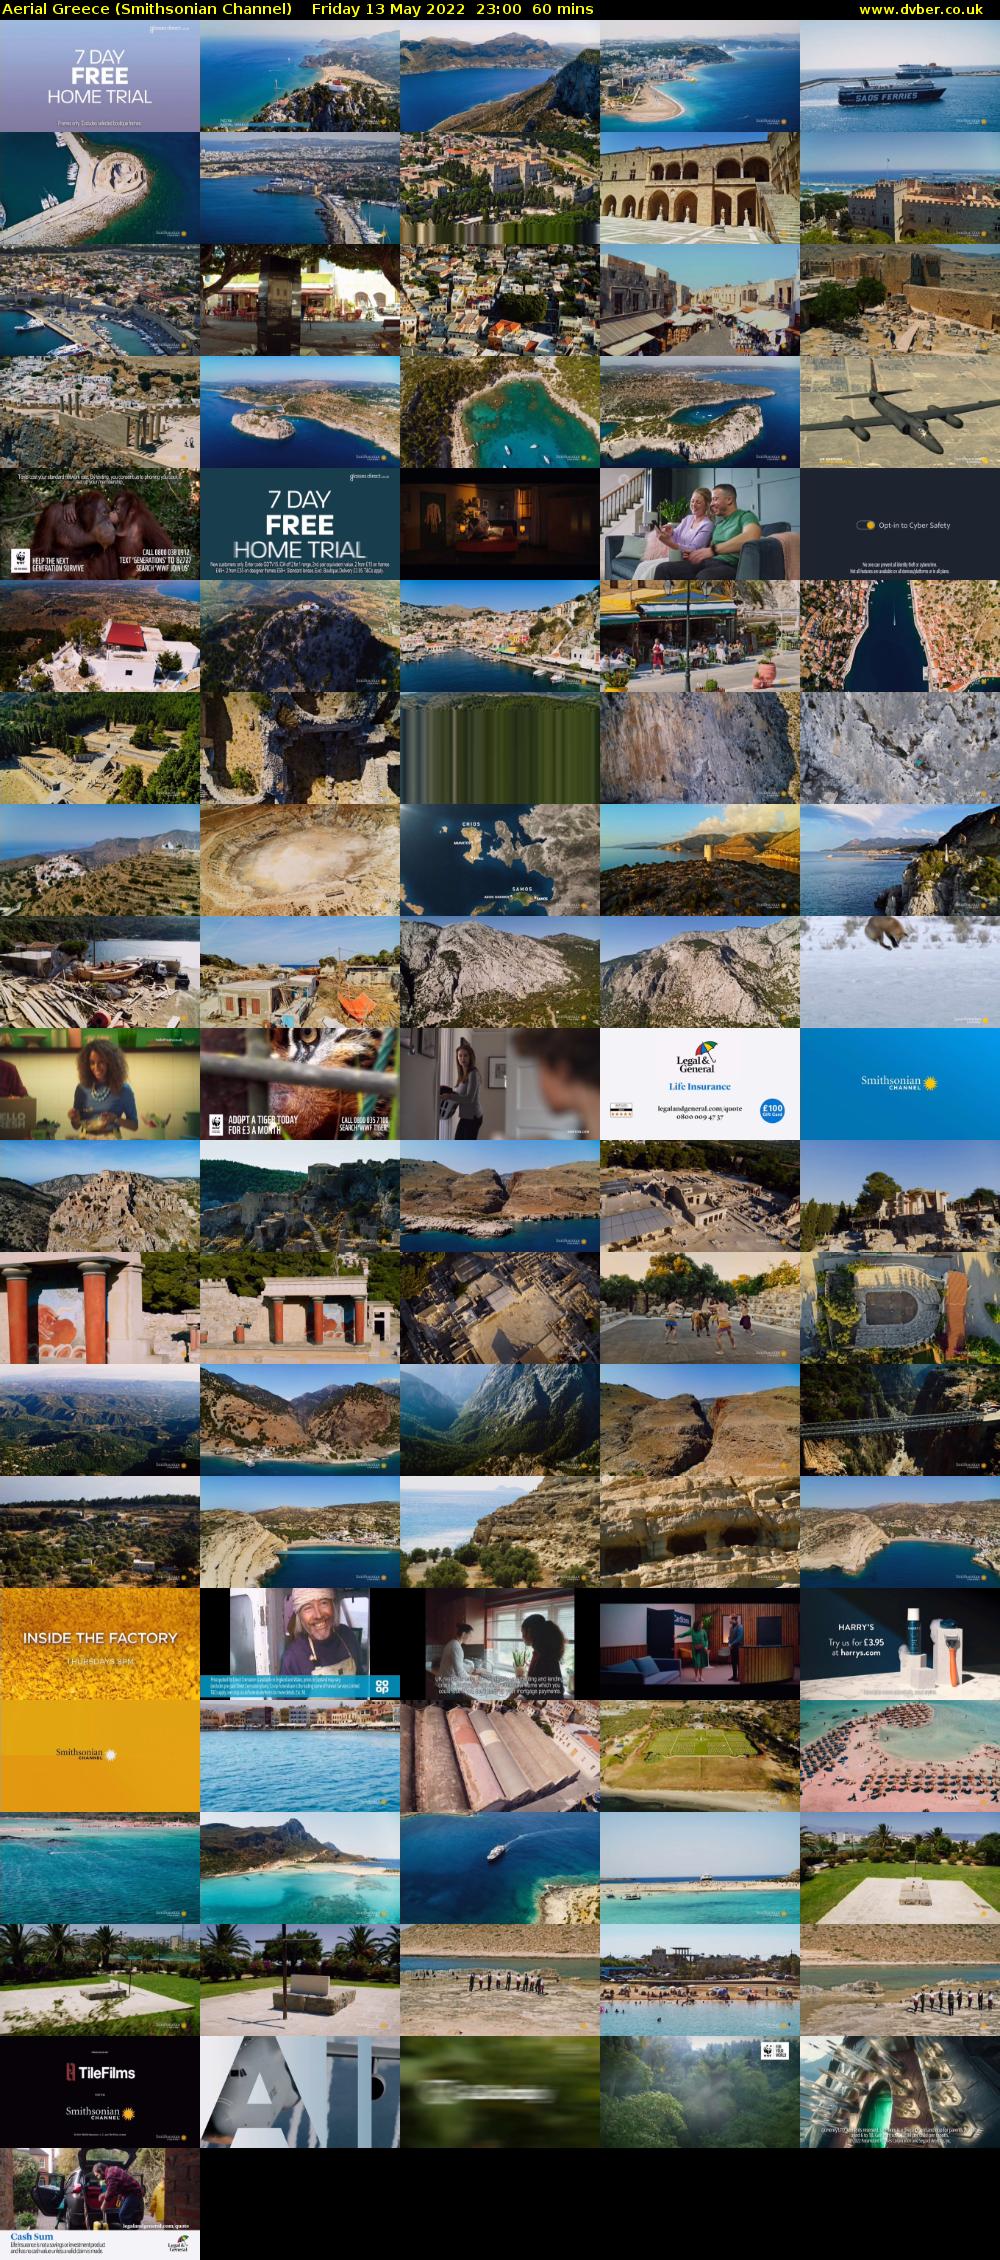 Aerial Greece (Smithsonian Channel) Friday 13 May 2022 23:00 - 00:00